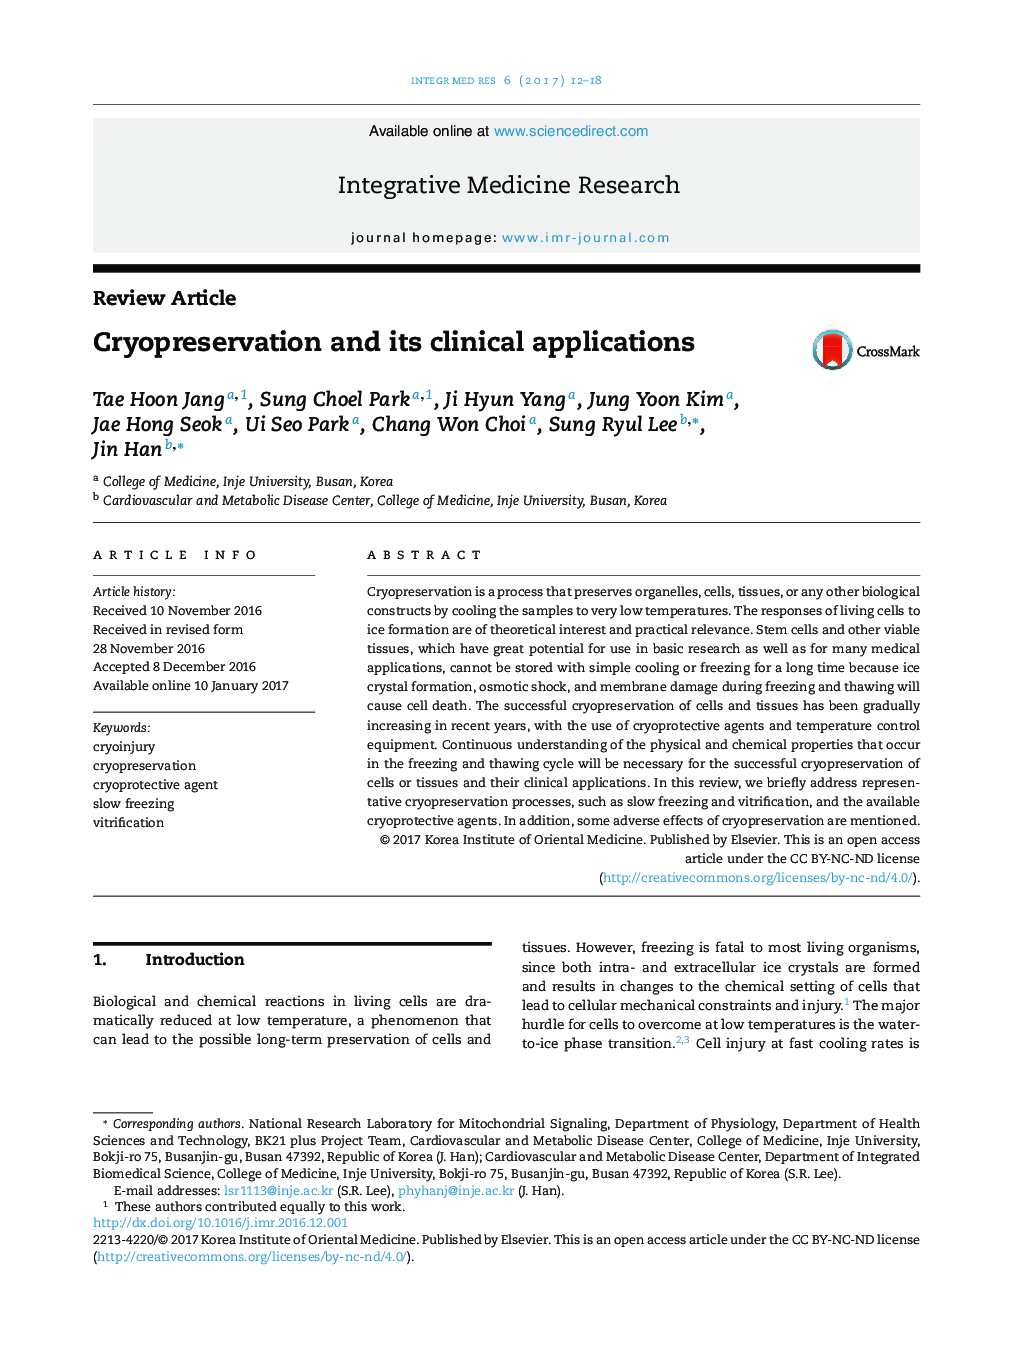 Cryopreservation and its clinical applications